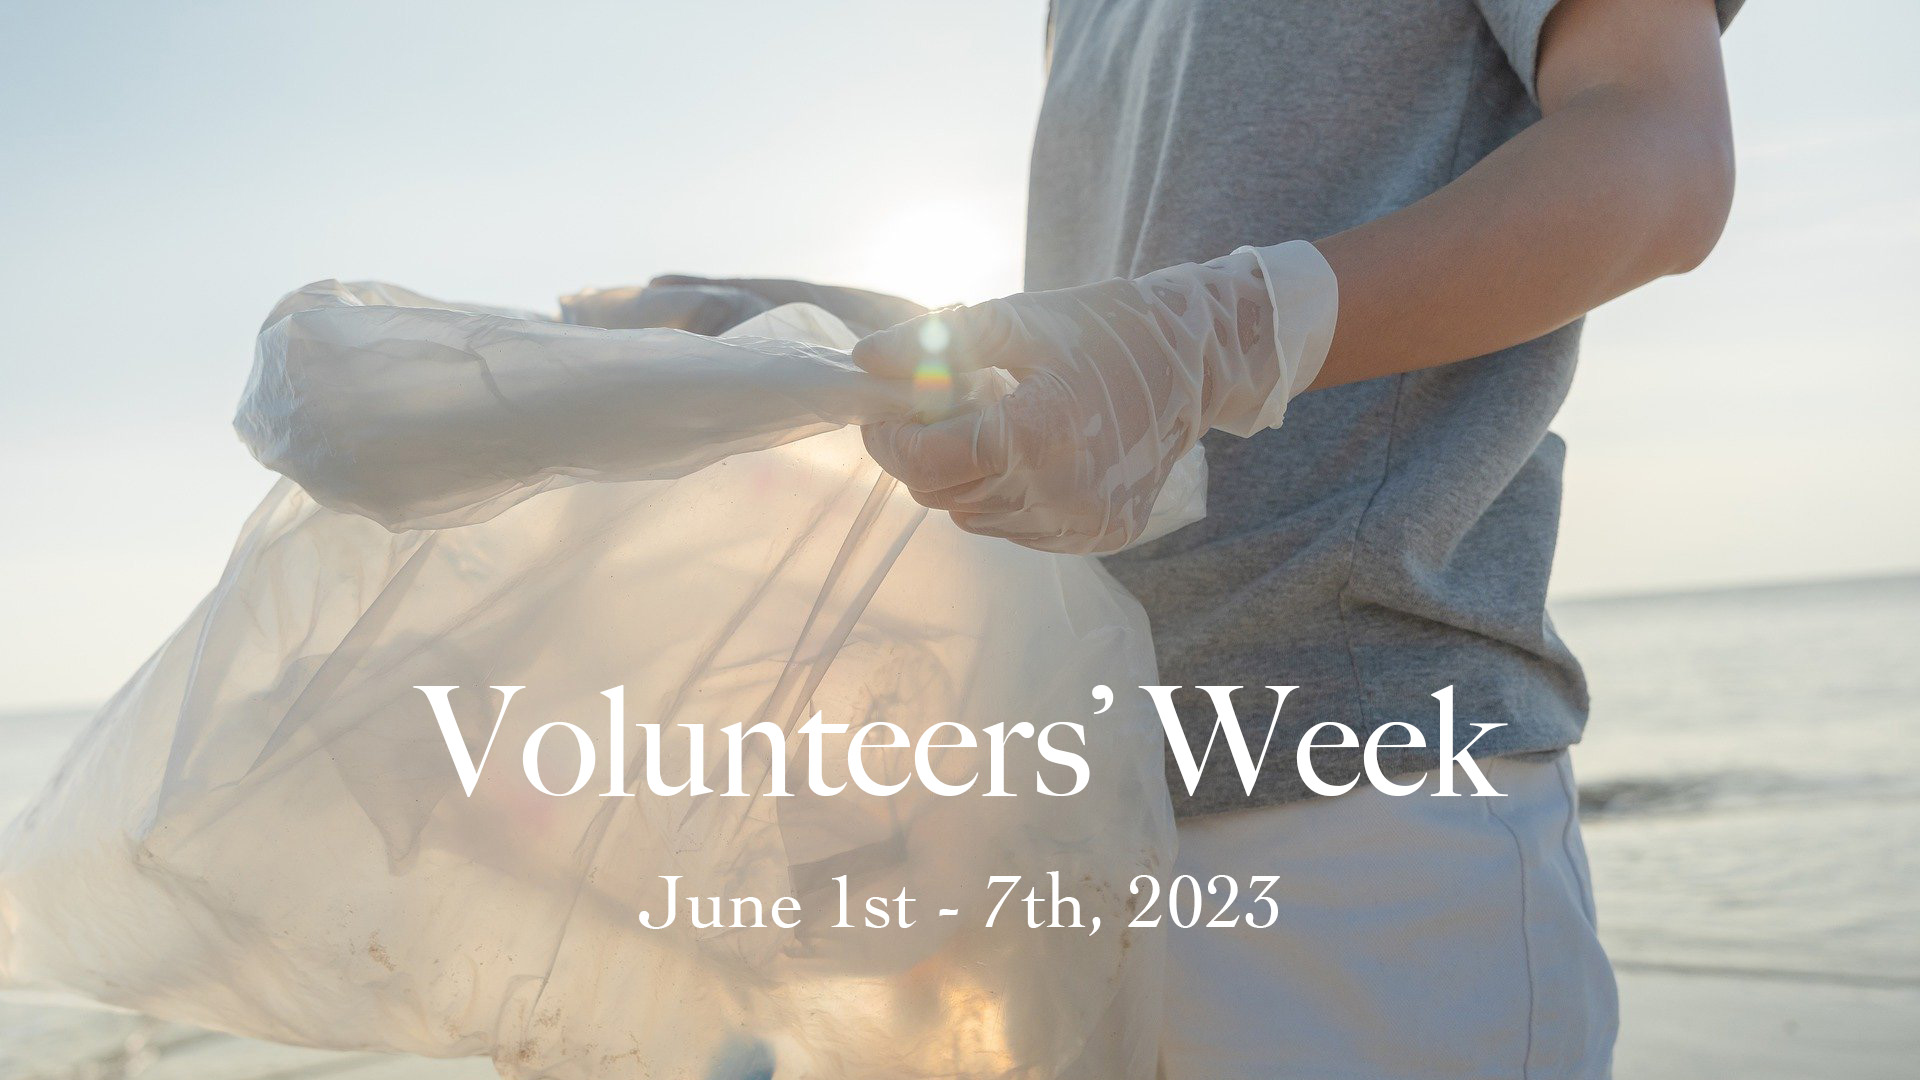 Younger child wearing gloves and holding a clear sack collecting garbage on the beach. Volunteers' Week June 1st - 7th, 2023 is written in white serif font.